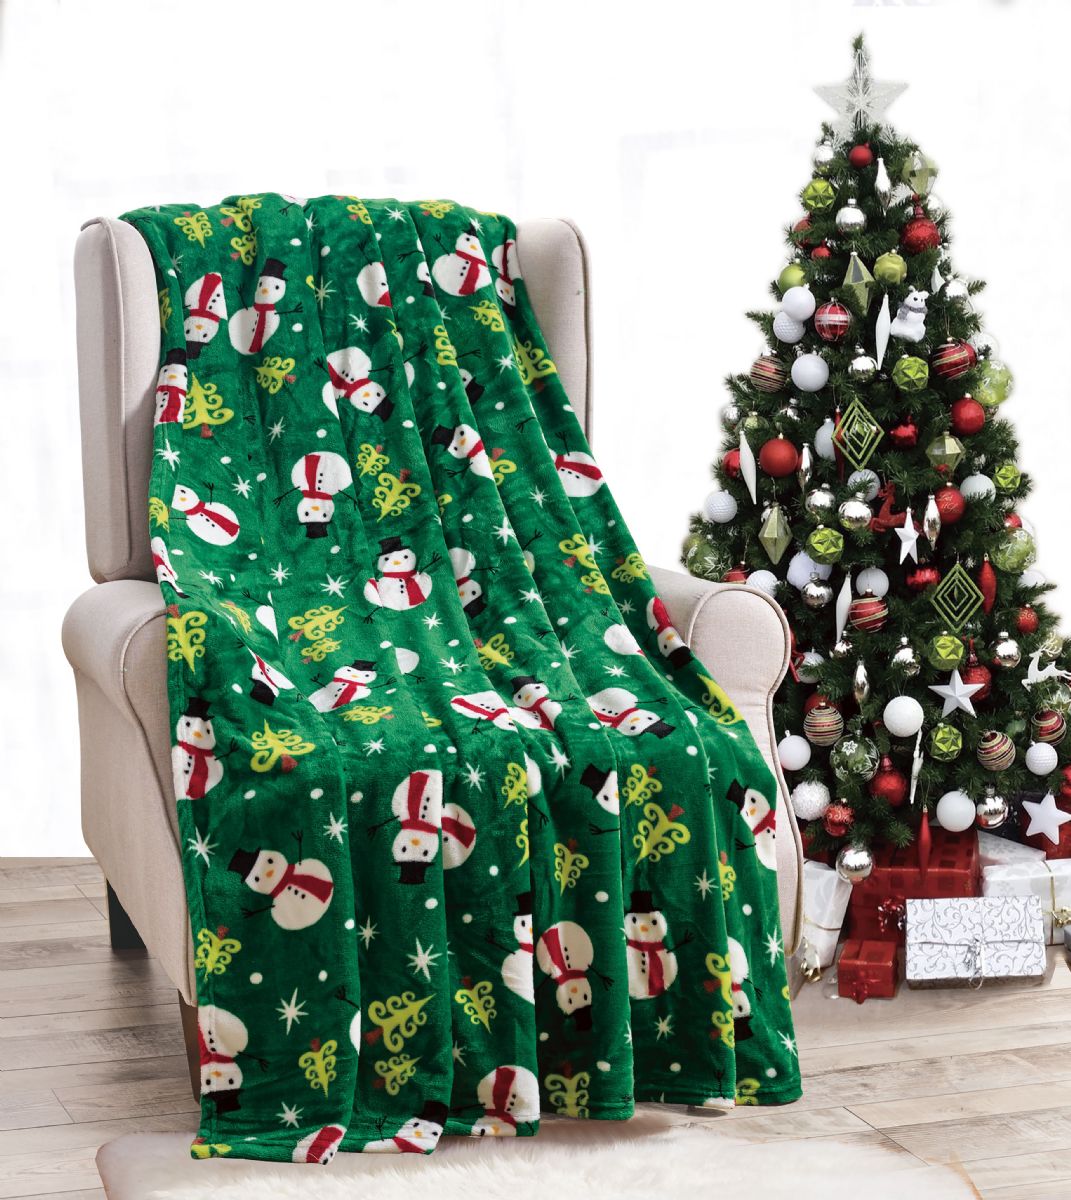 120 Pieces of Holiday Themed Fleece Blanket Pallet Deal Assorted Prints 50x60